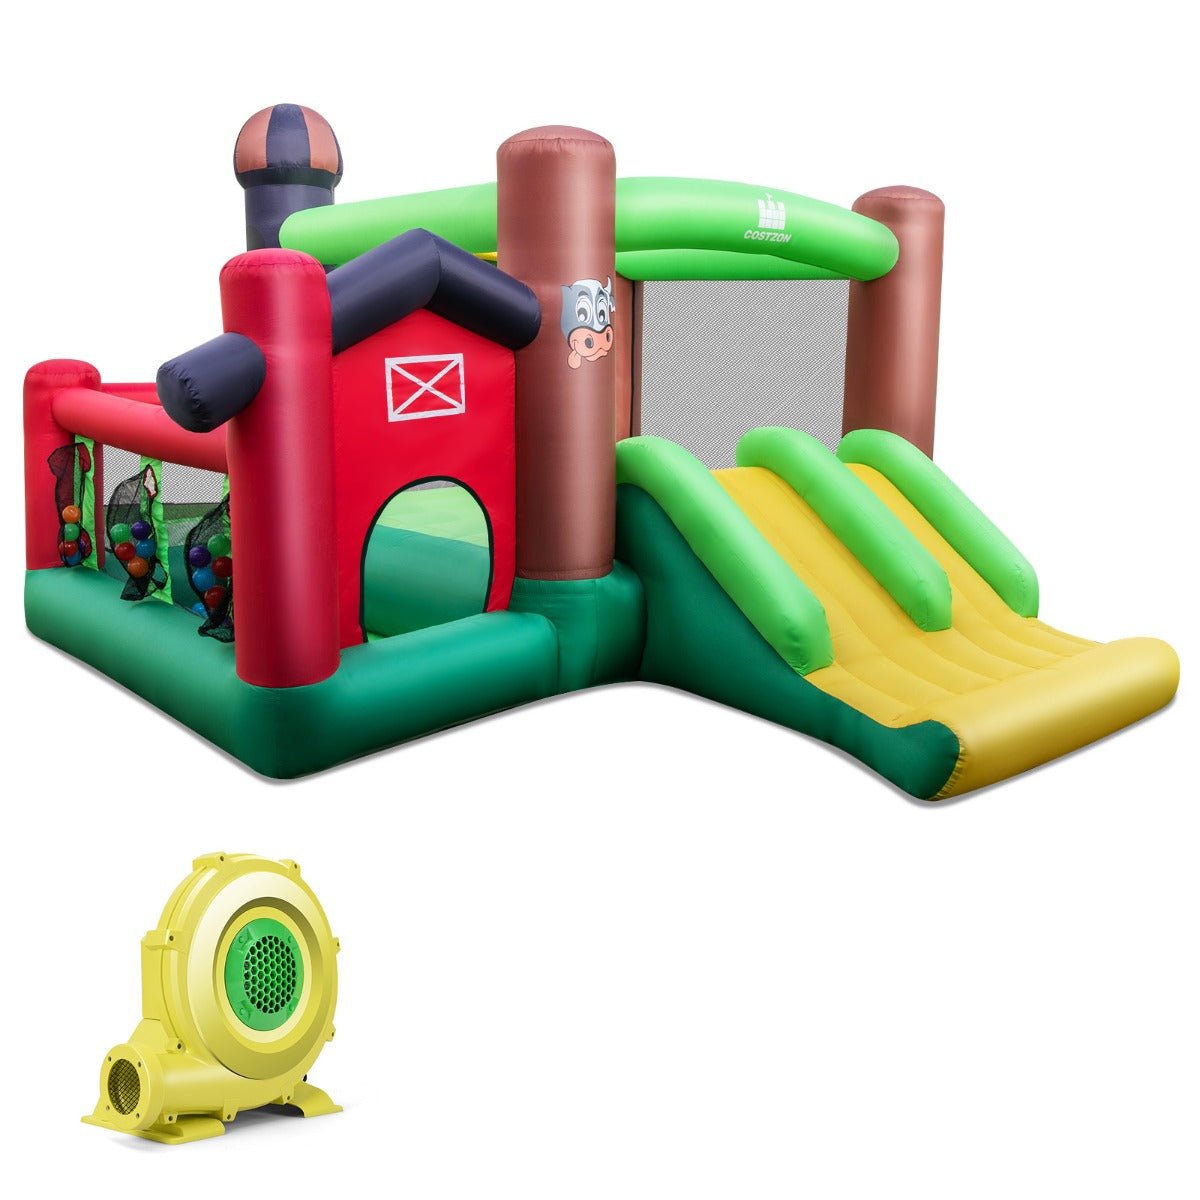 Outdoor Inflatable Bounce House with Double Slides - Double the Fun! (Blower Included)